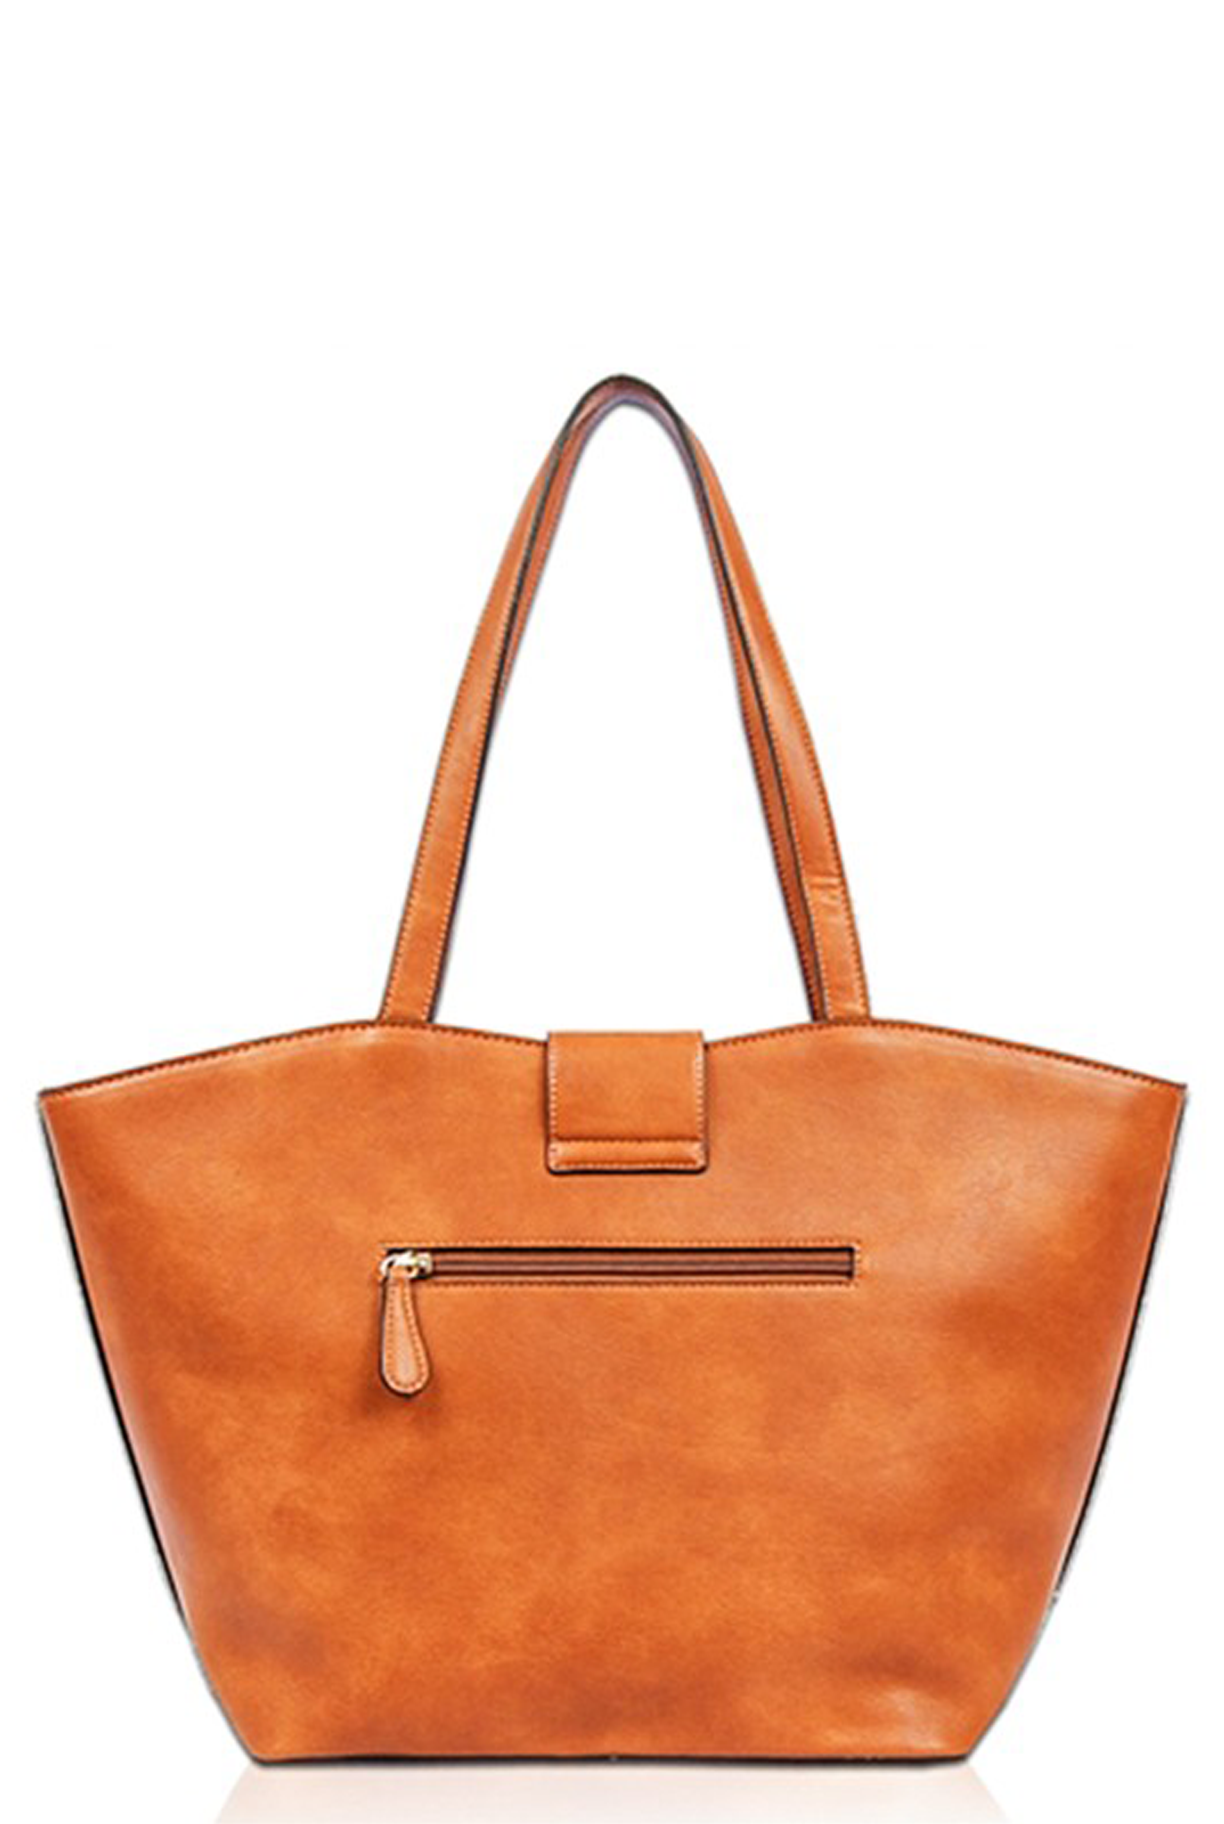 Women's 'More Than Words' Camel Brown Vegan Leather Chic Satchel Bag ...